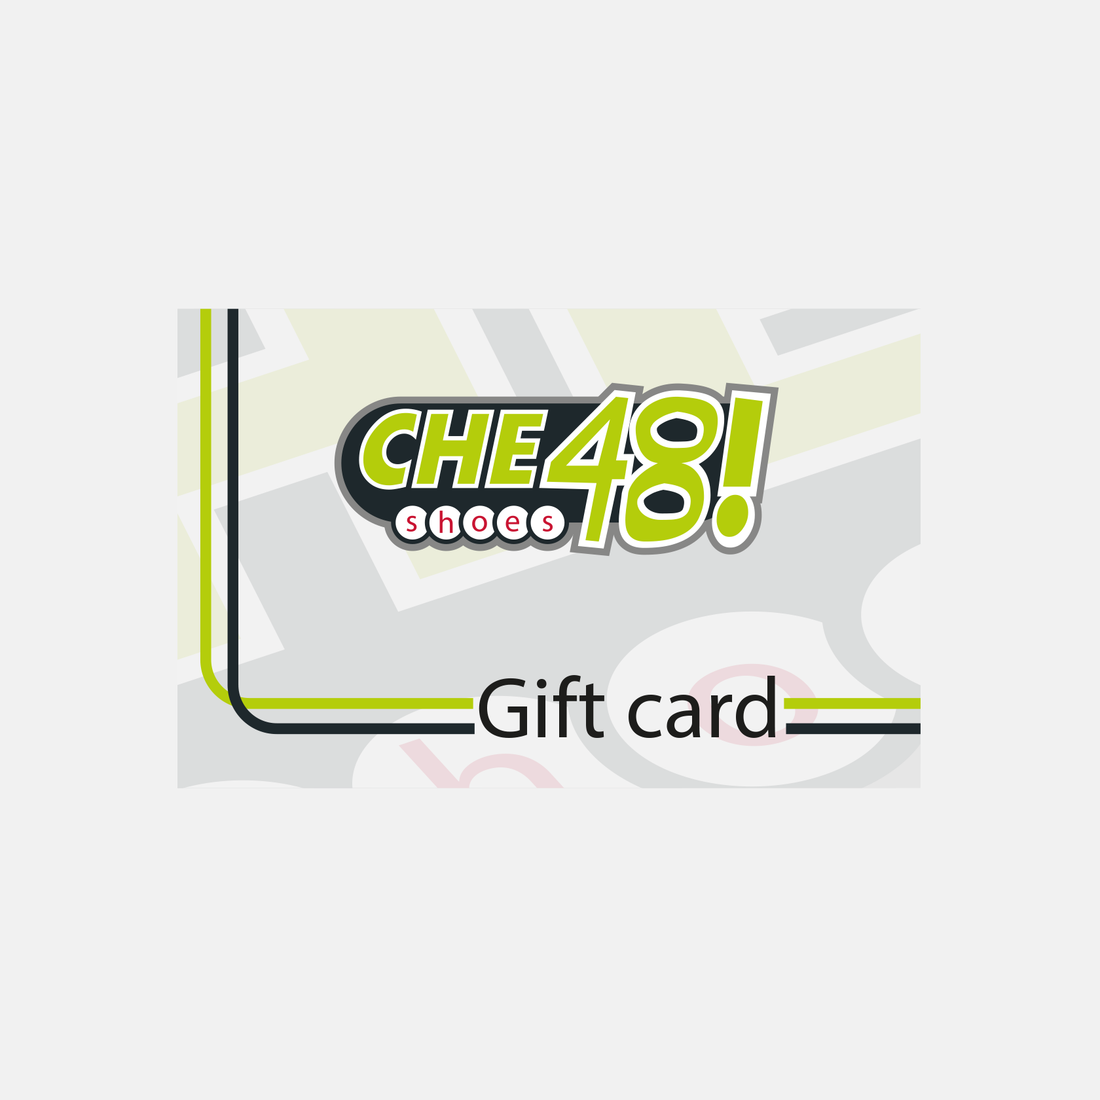 Gift Card Che 48!